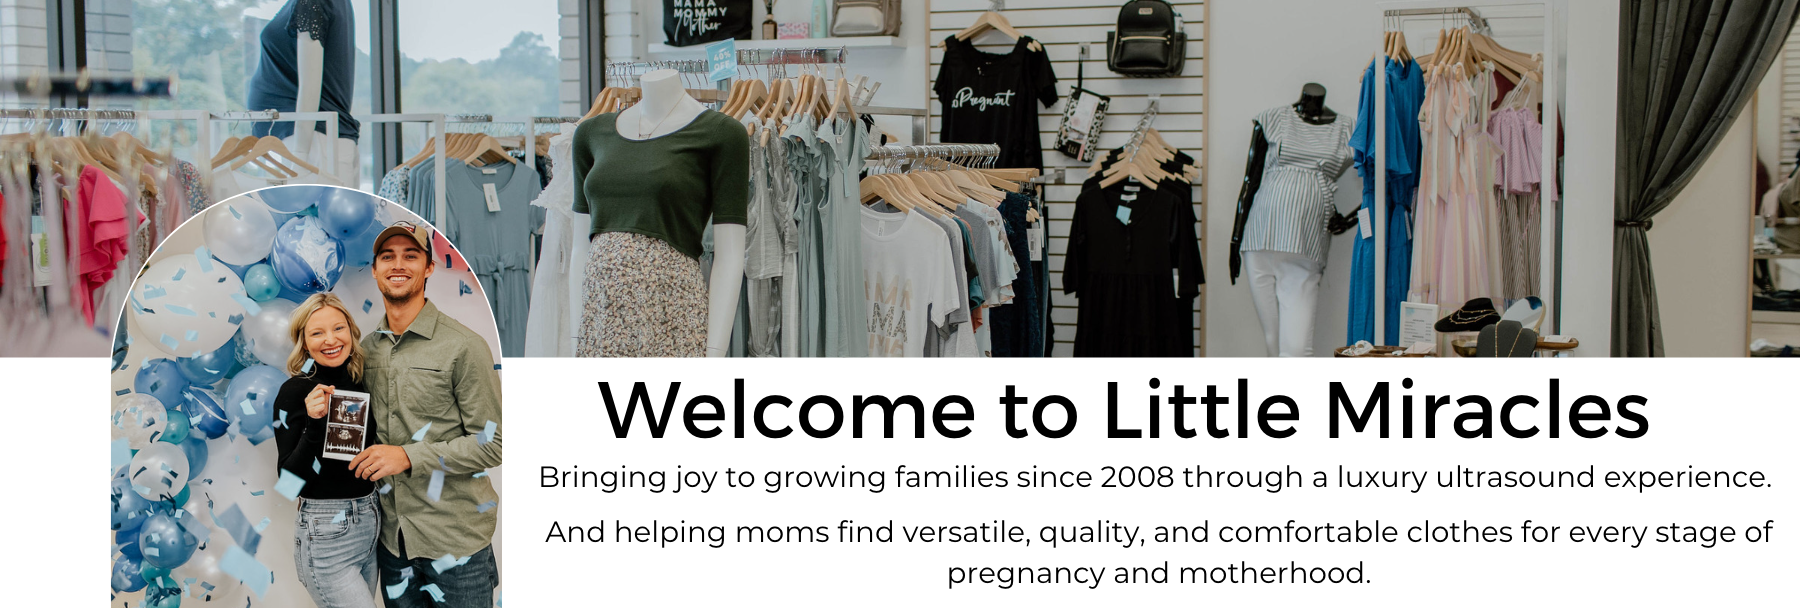 Welcome to Little Miracles. Bringing joy to growing families since 2008 through a luxury ultrasound experience. And helping moms find versatile, quality, and comfortable clothes for every stage of pregnancy and motherhood.